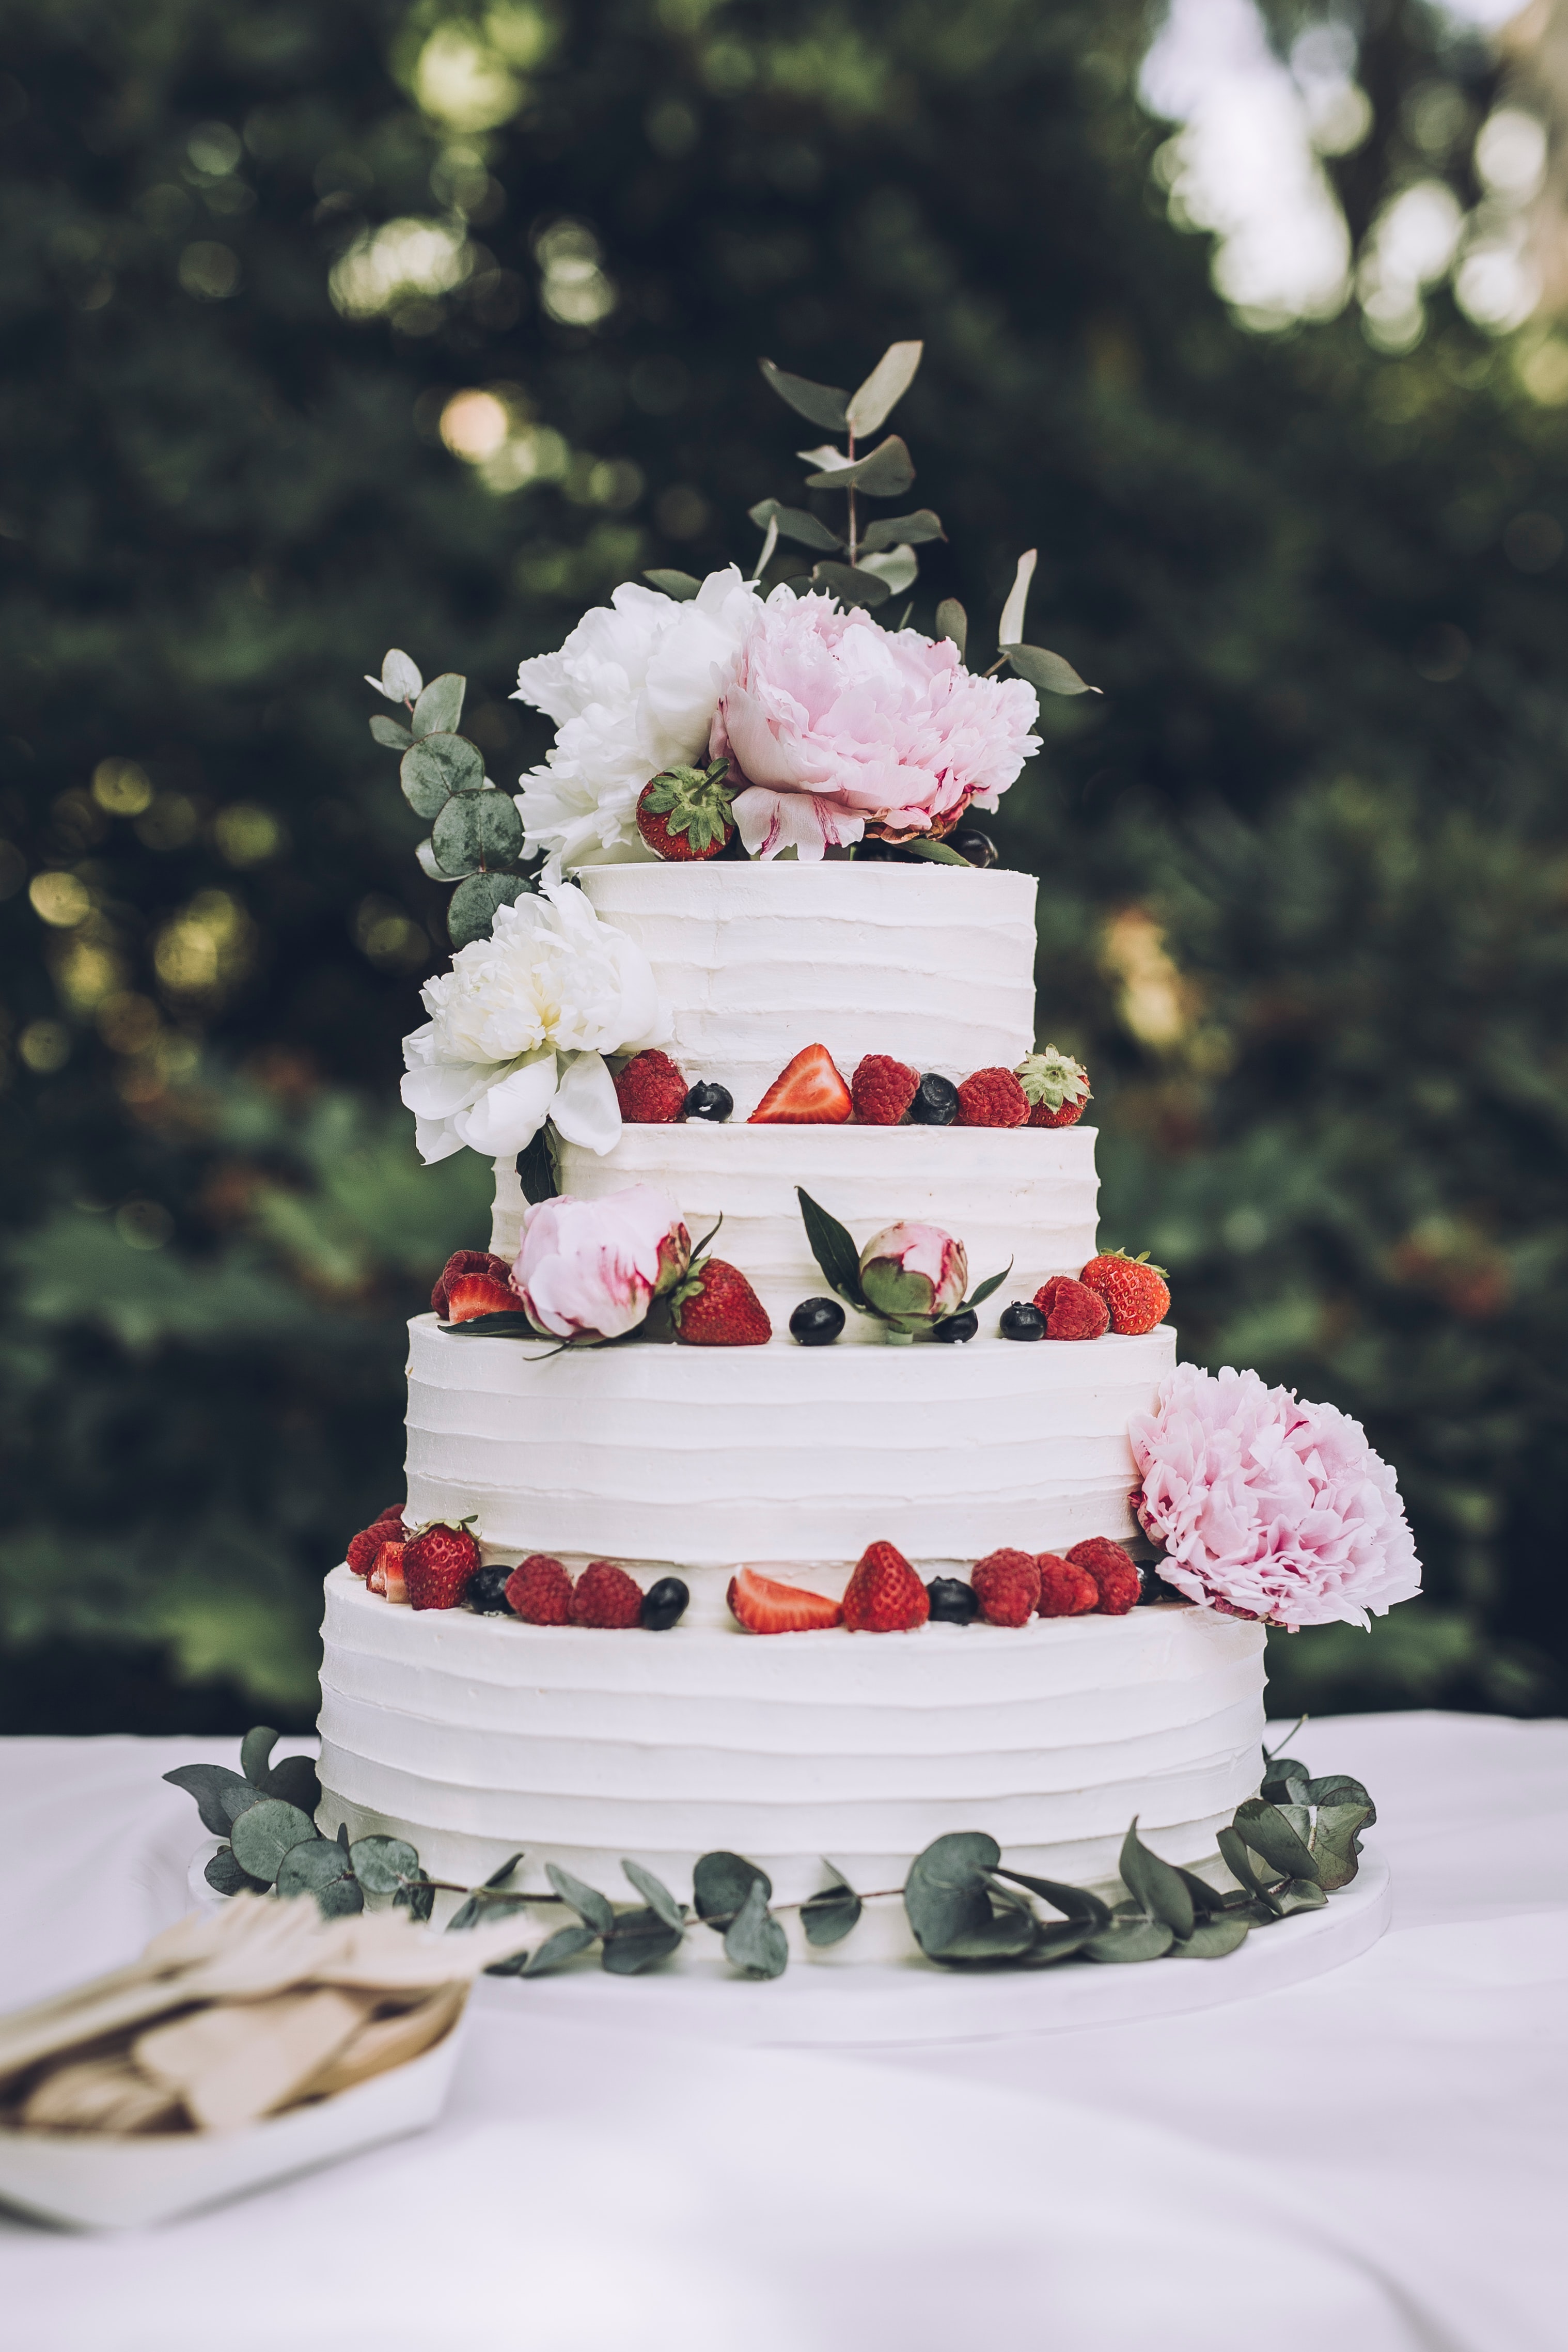 A white wedding cake decorated with strawberies, bluerries, eucalyptus leaves, and pink flowers